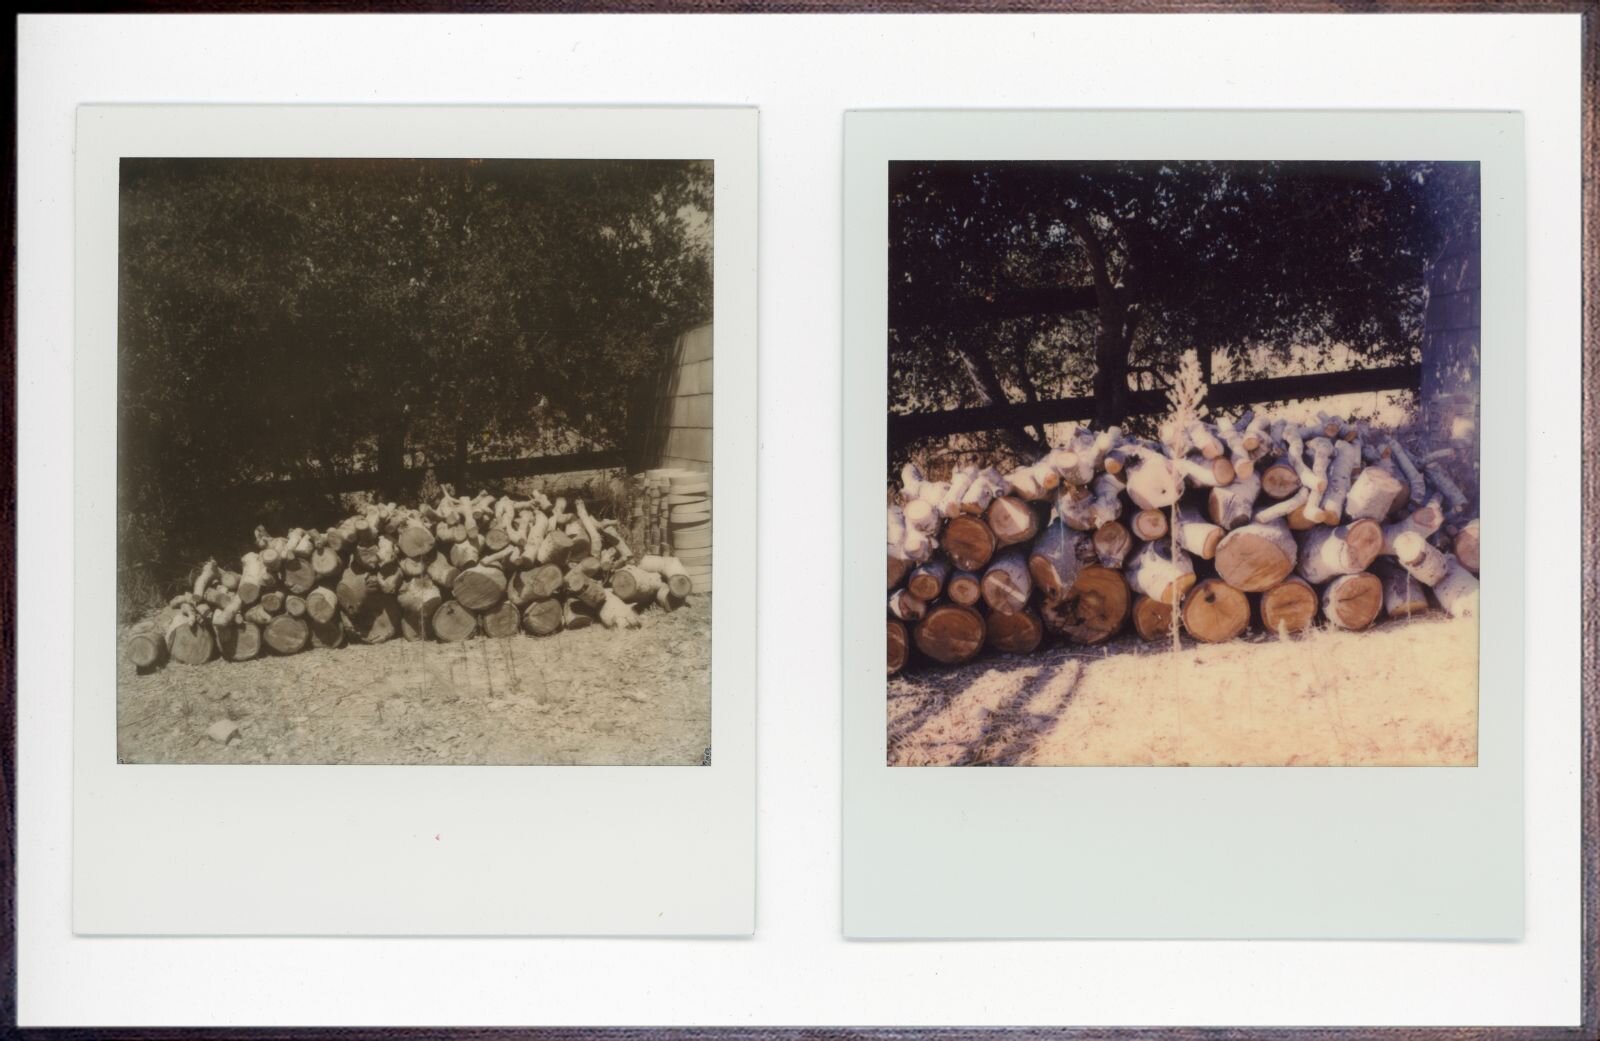  Cole Sternberg  new growth,  2020 Polaroid diptych&nbsp; 3.5” x 8” (in total) 